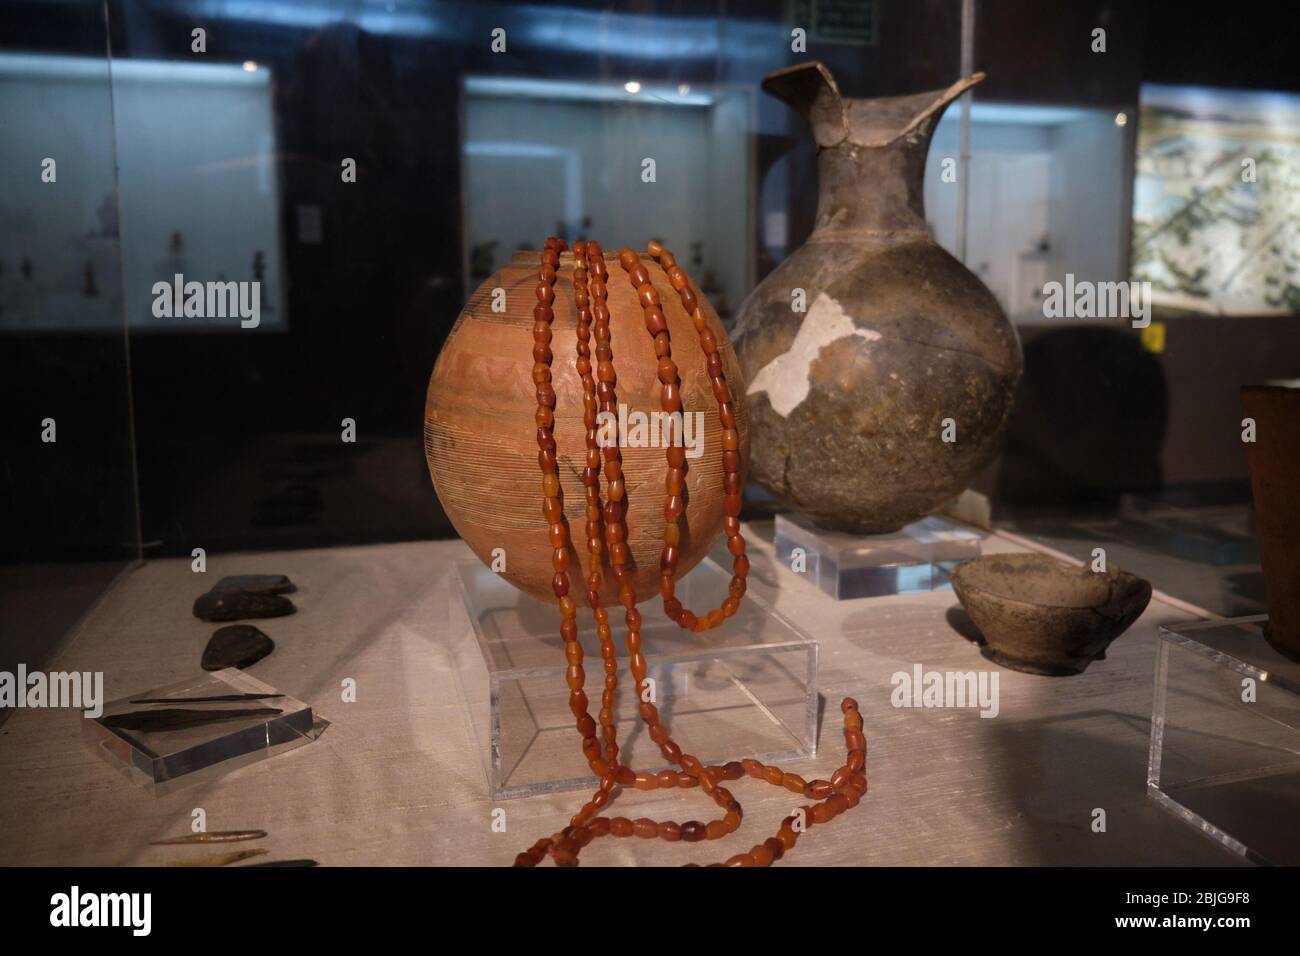 New Delhi / India - September 26, 2019: Ancient pottery of the Indus Valley Civilization in the National Museum of India in New Delhi Stock Photo